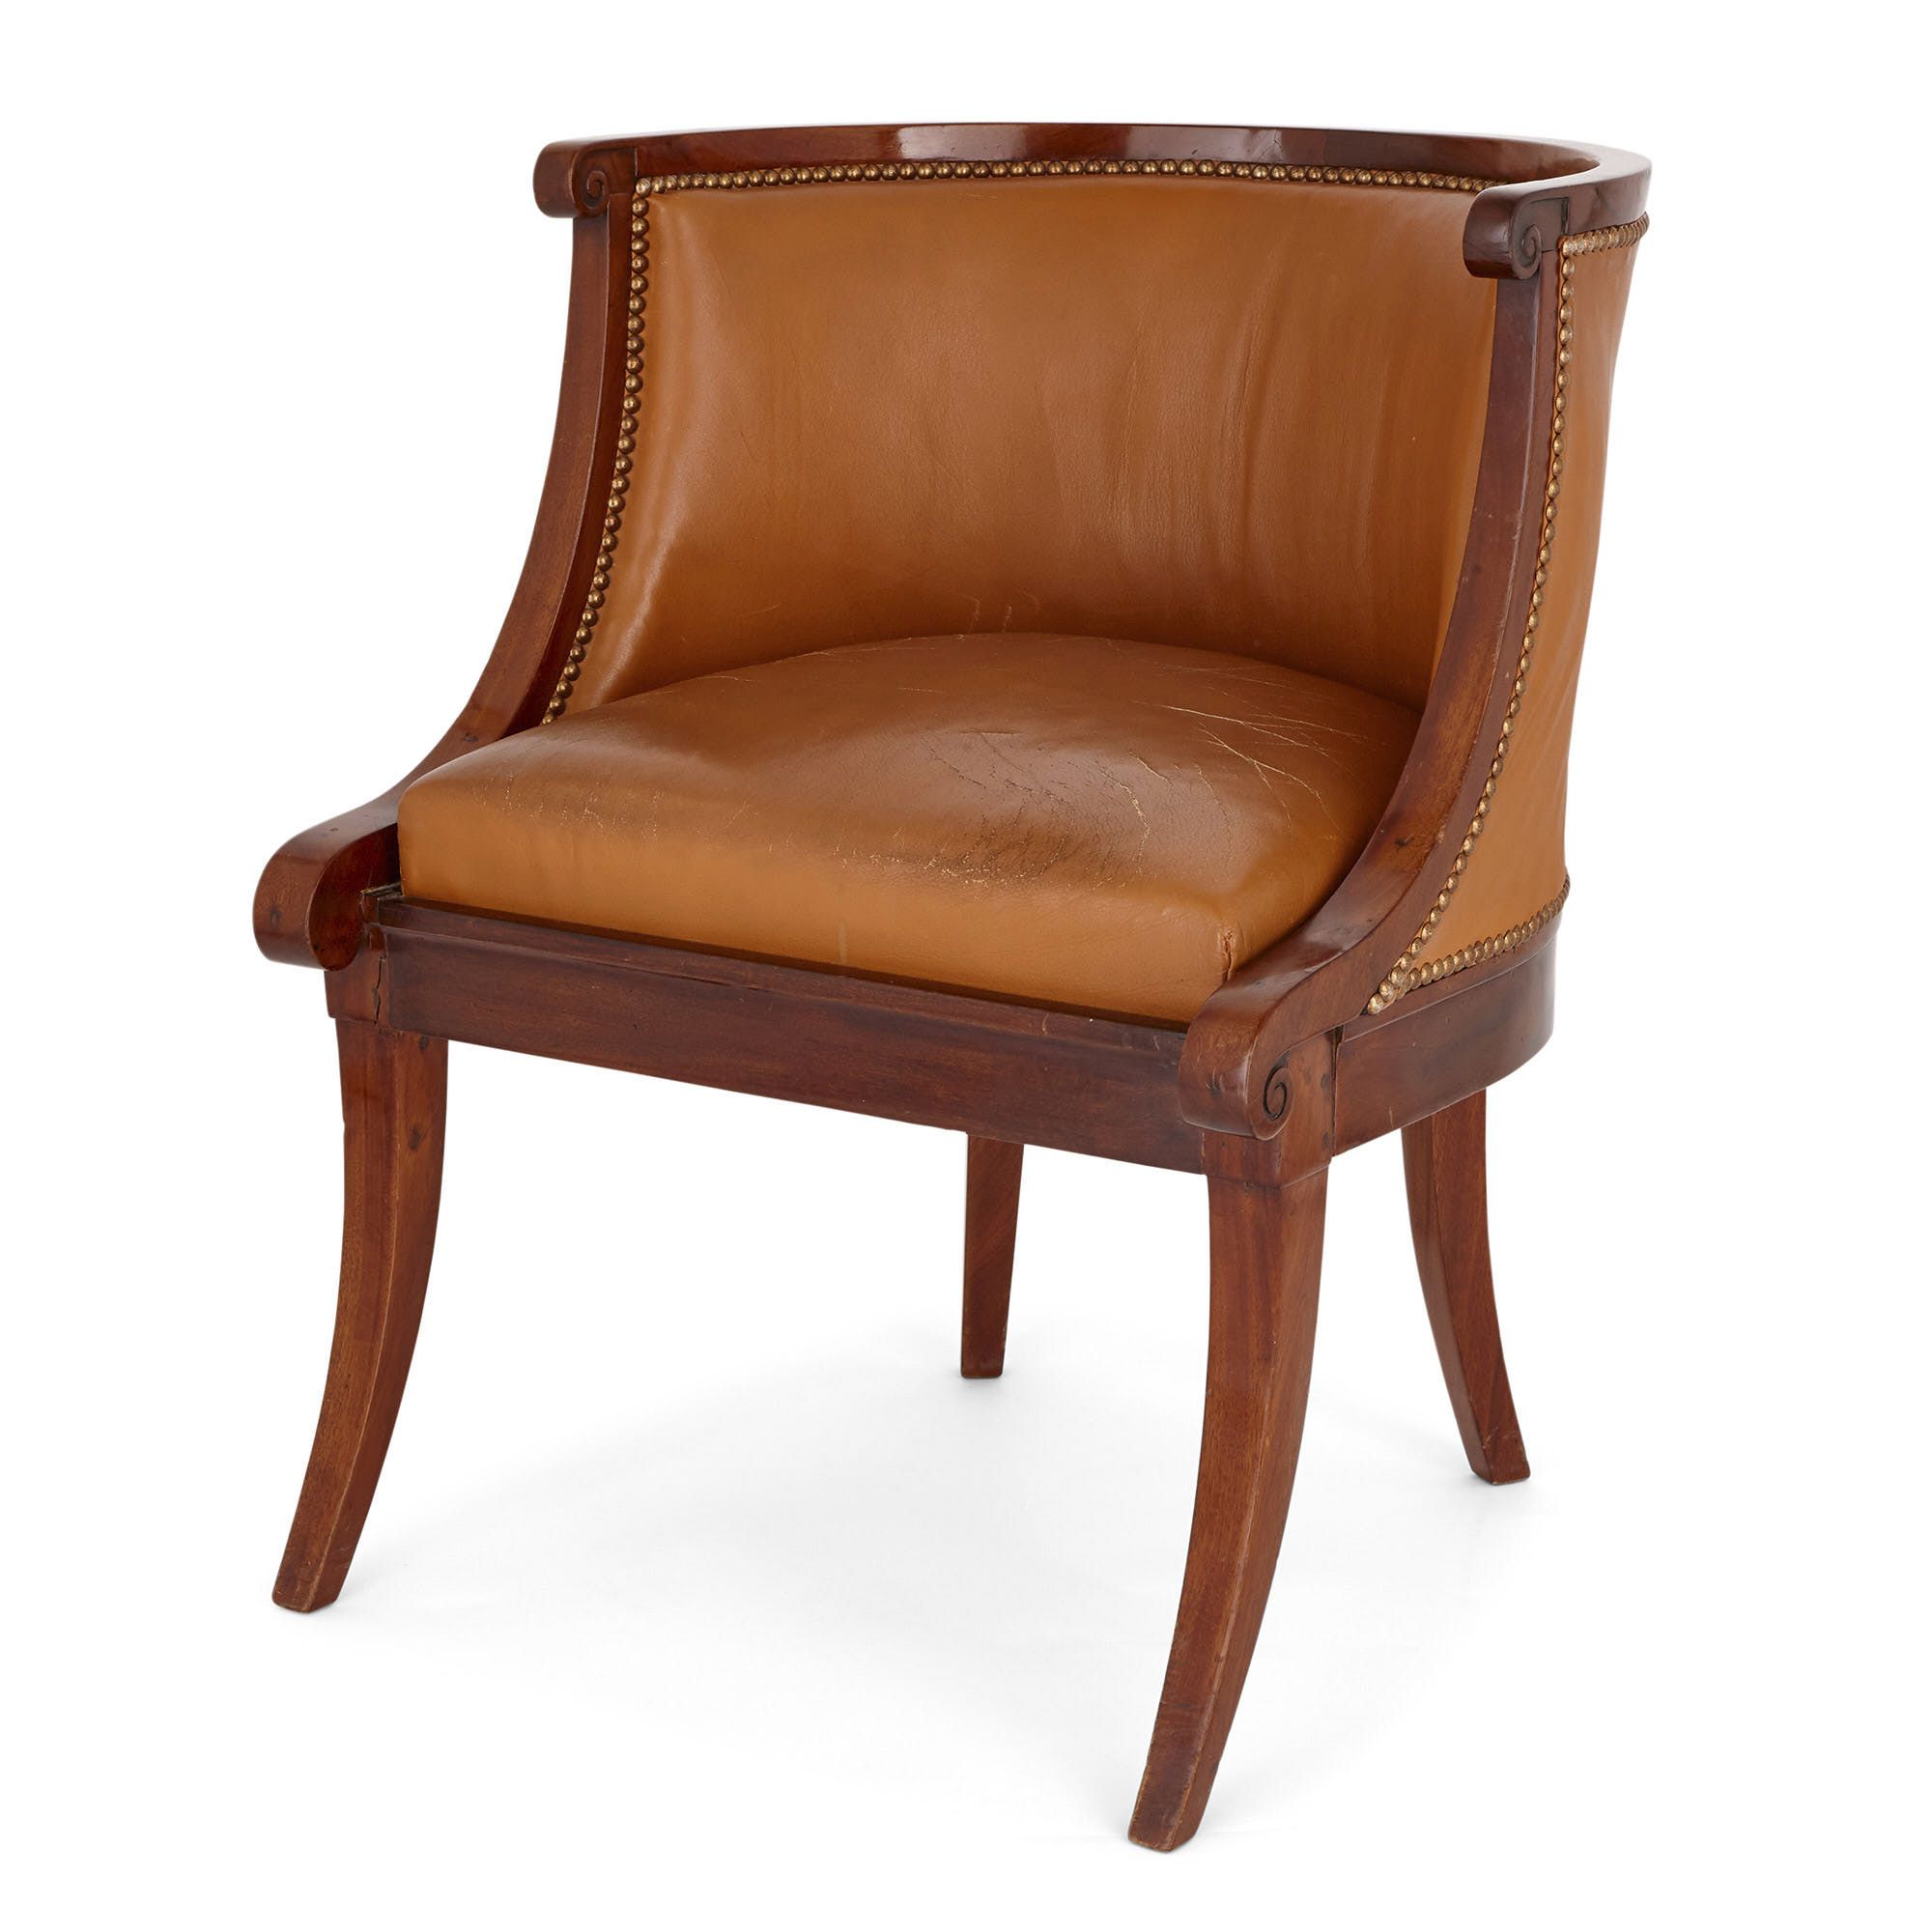 louis xvi period wood and leather library chair  mayfair